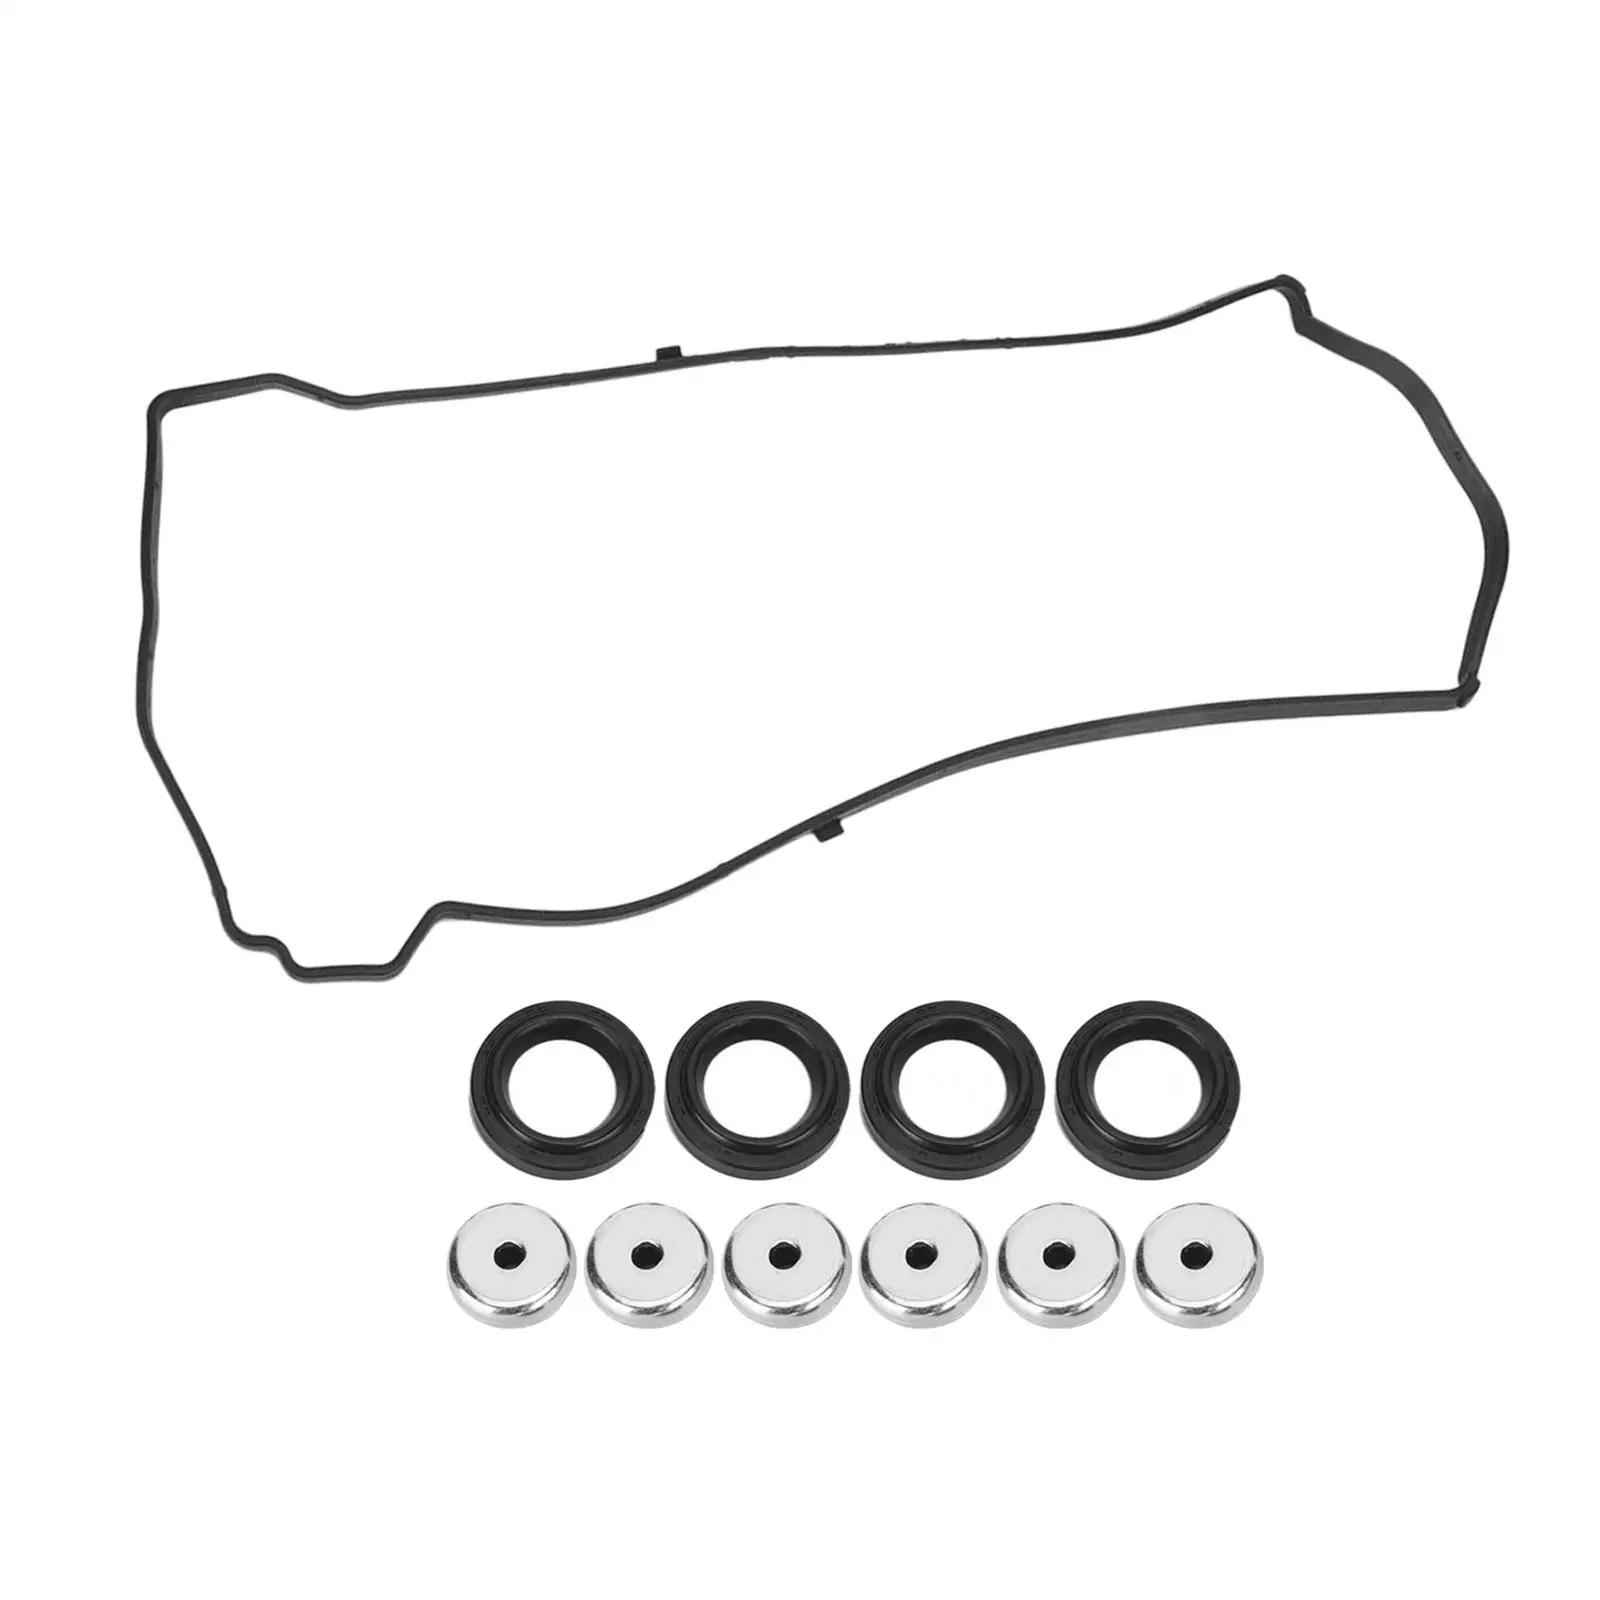 Valve Cover Gasket Seal Cover Gasket Set 12030-pnc-000 Assembly Mounting